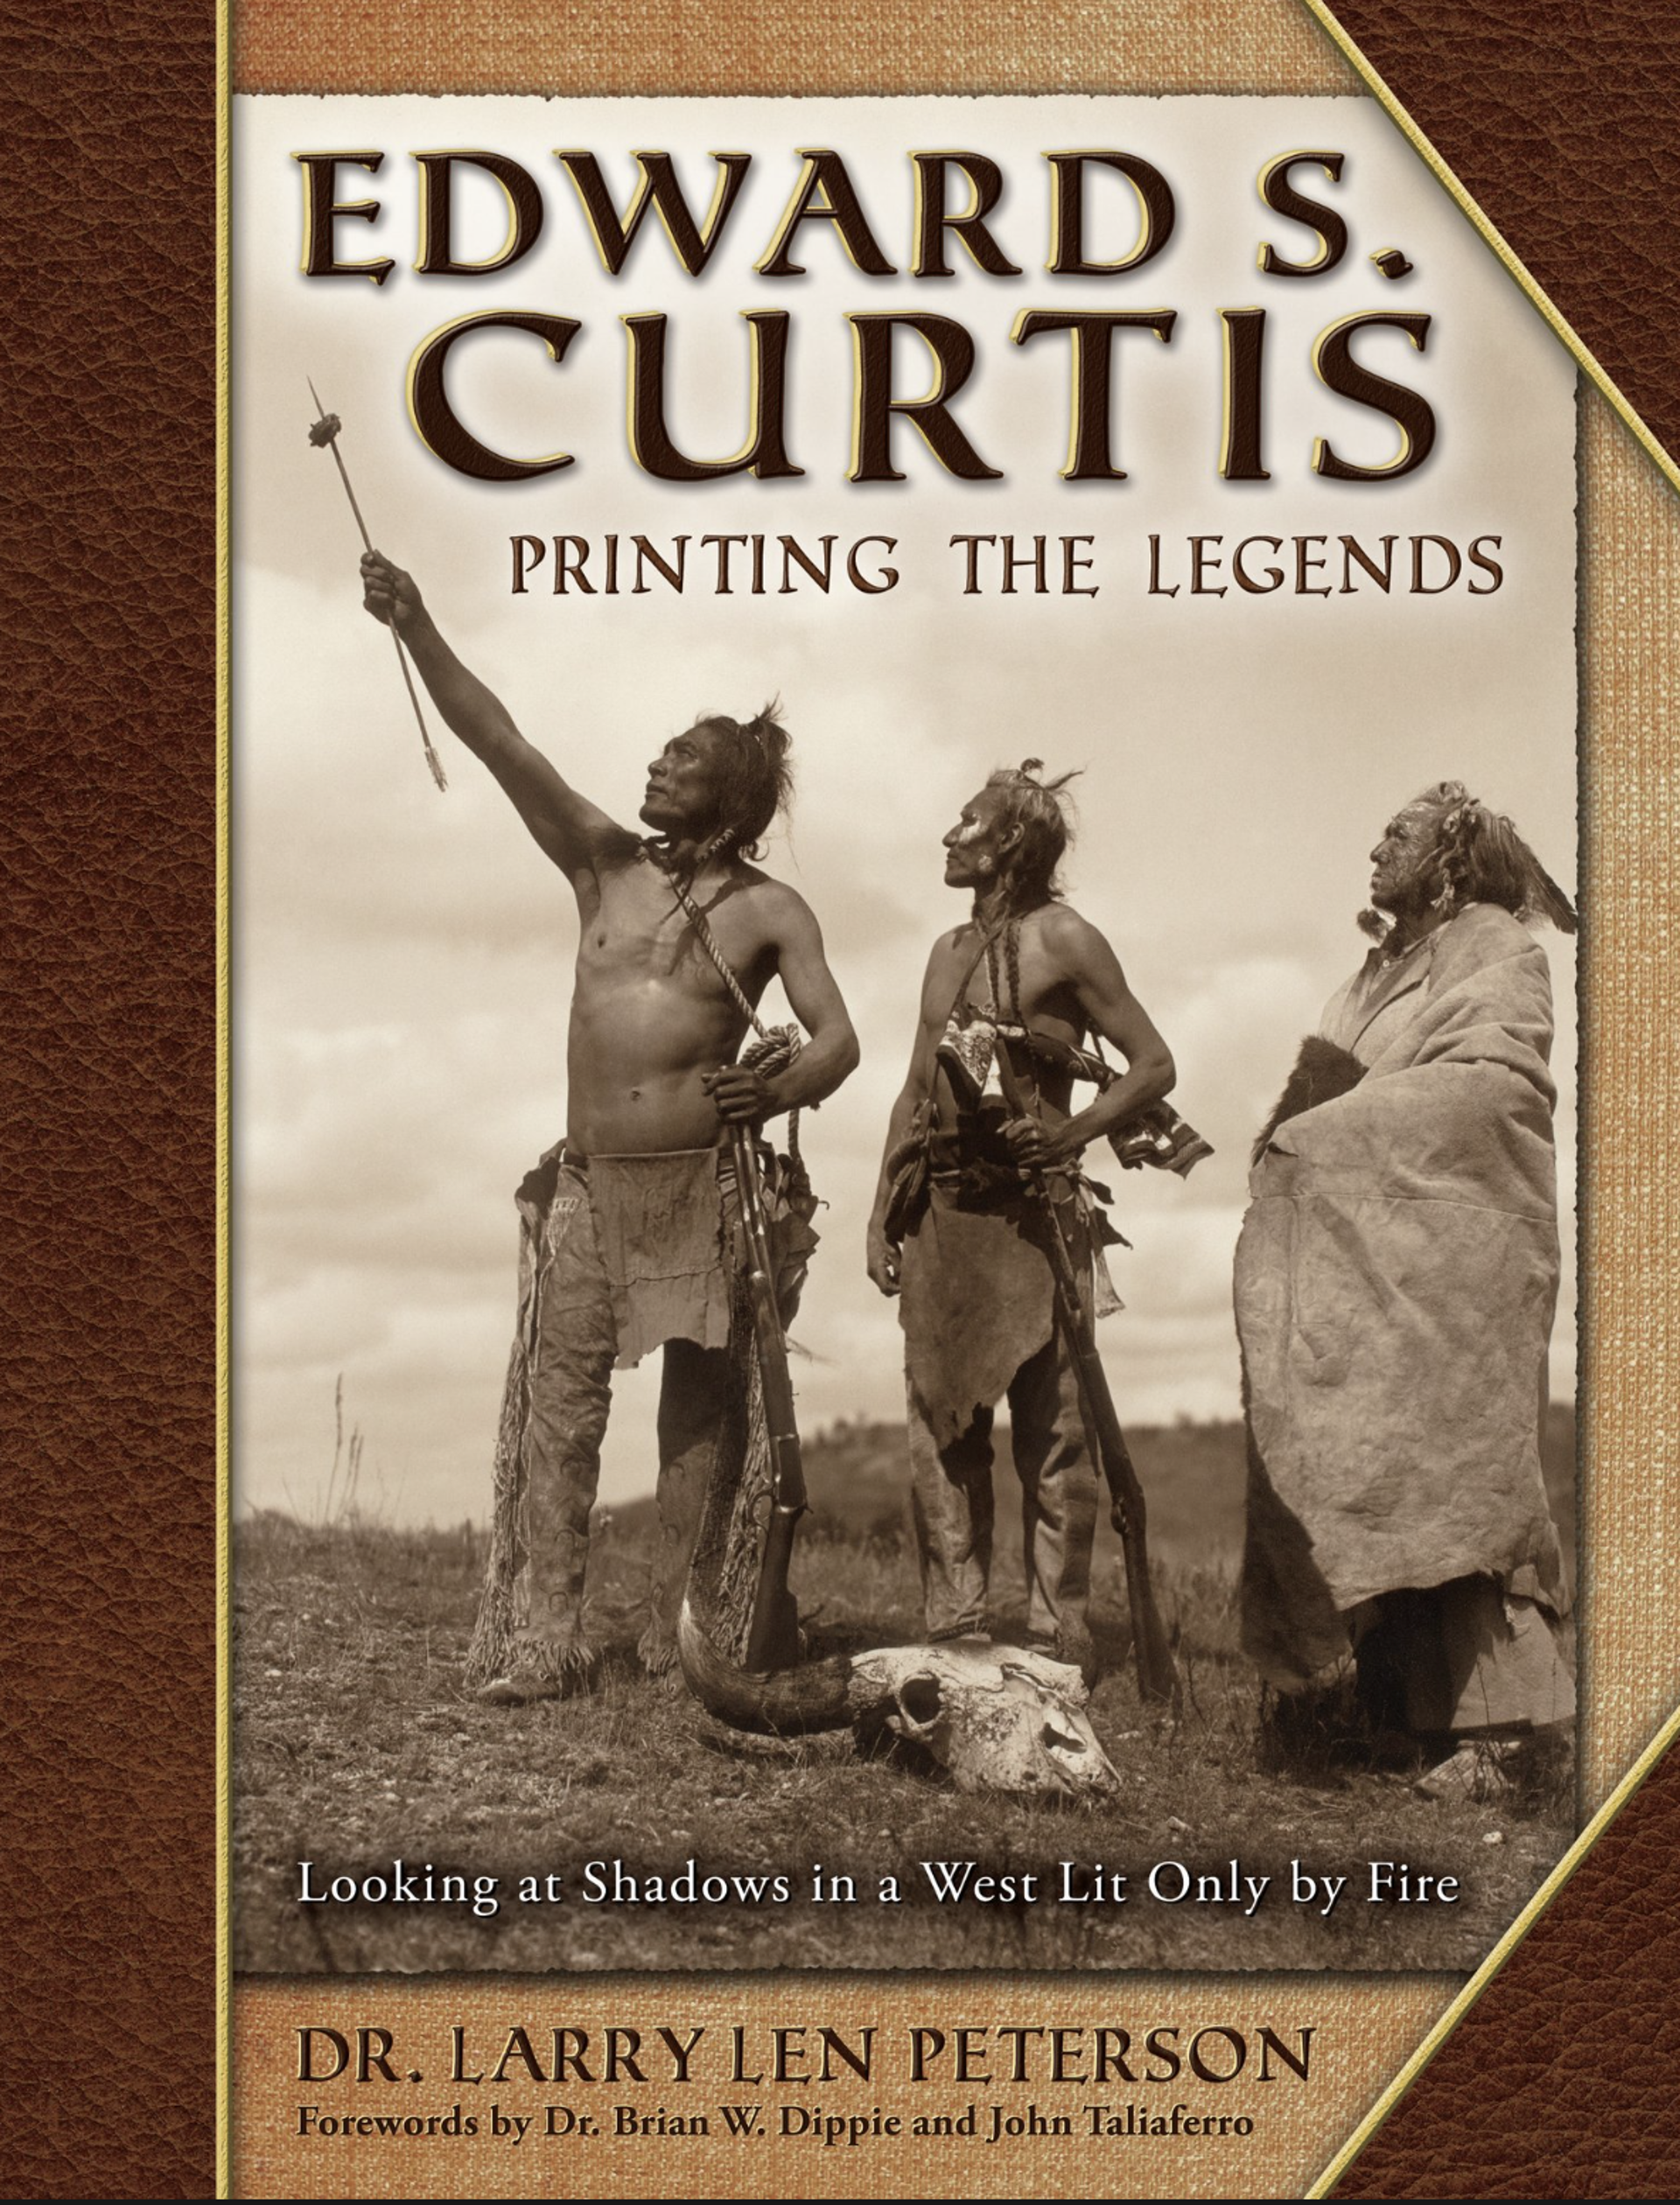 Edward S. Curtis Printing the Legends by Dr. Larry Len Peterson